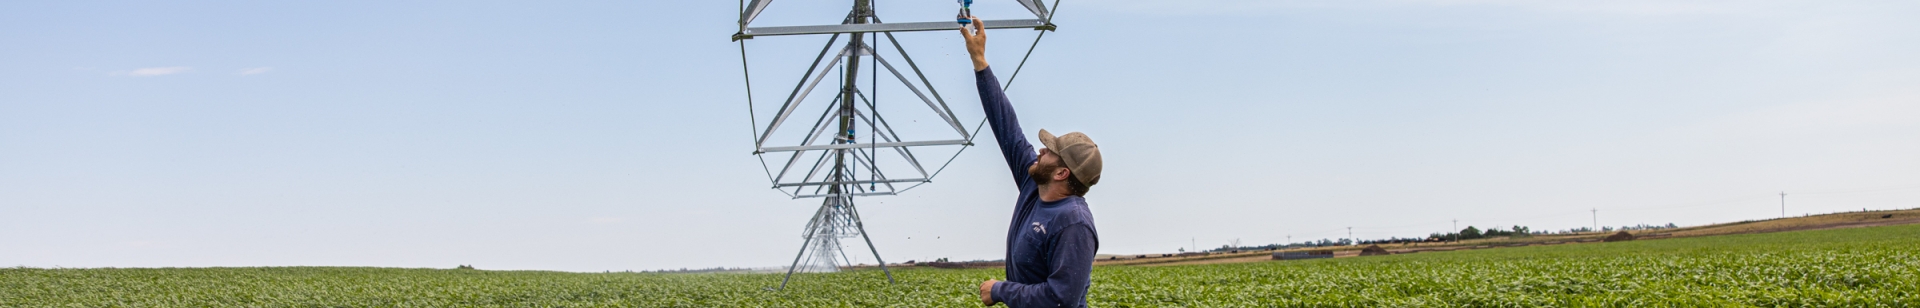 Collecting a water sample from an irrigation pivot